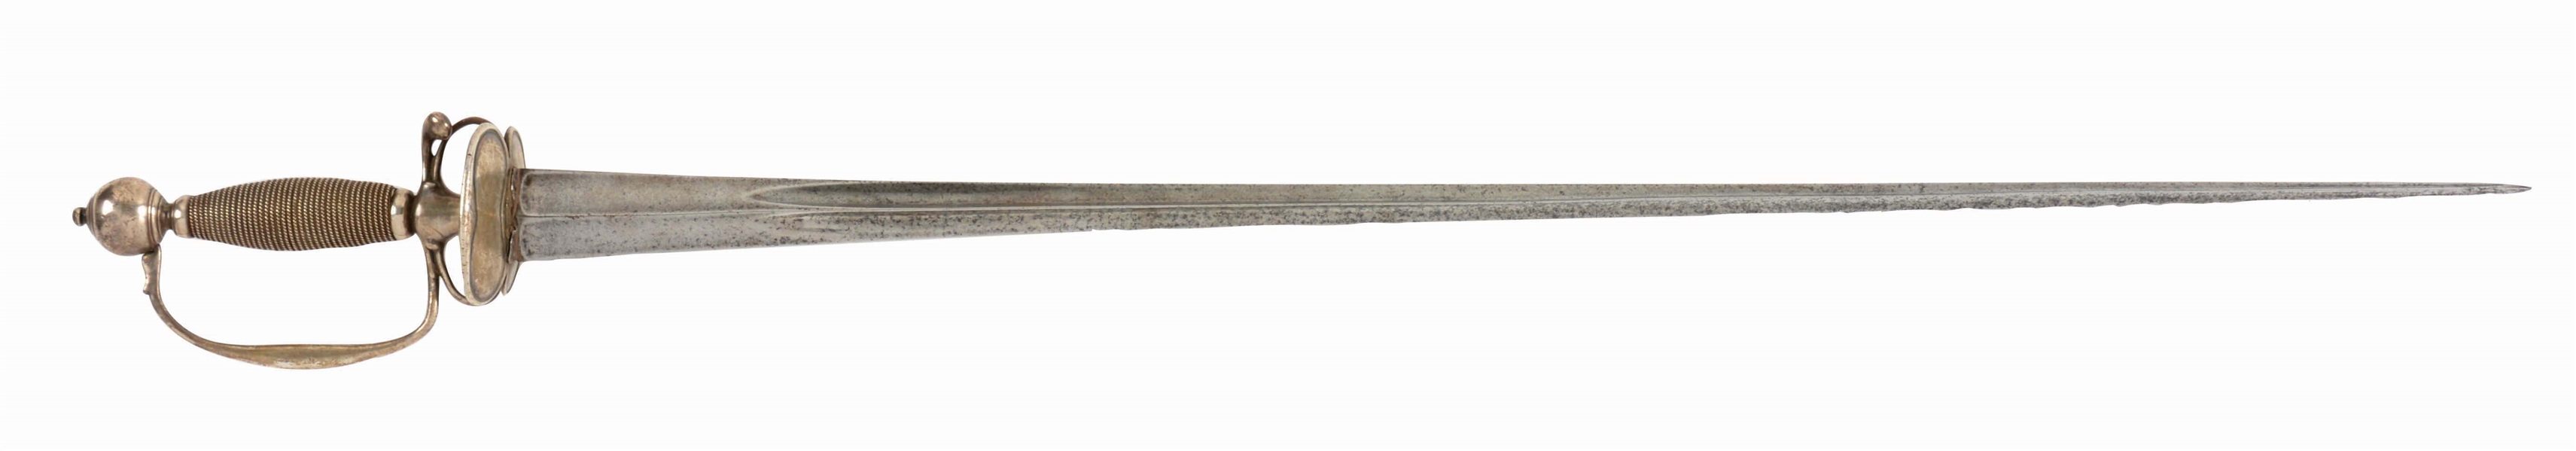 18TH CENTURY SILVER-HILTED SMALL SWORD.